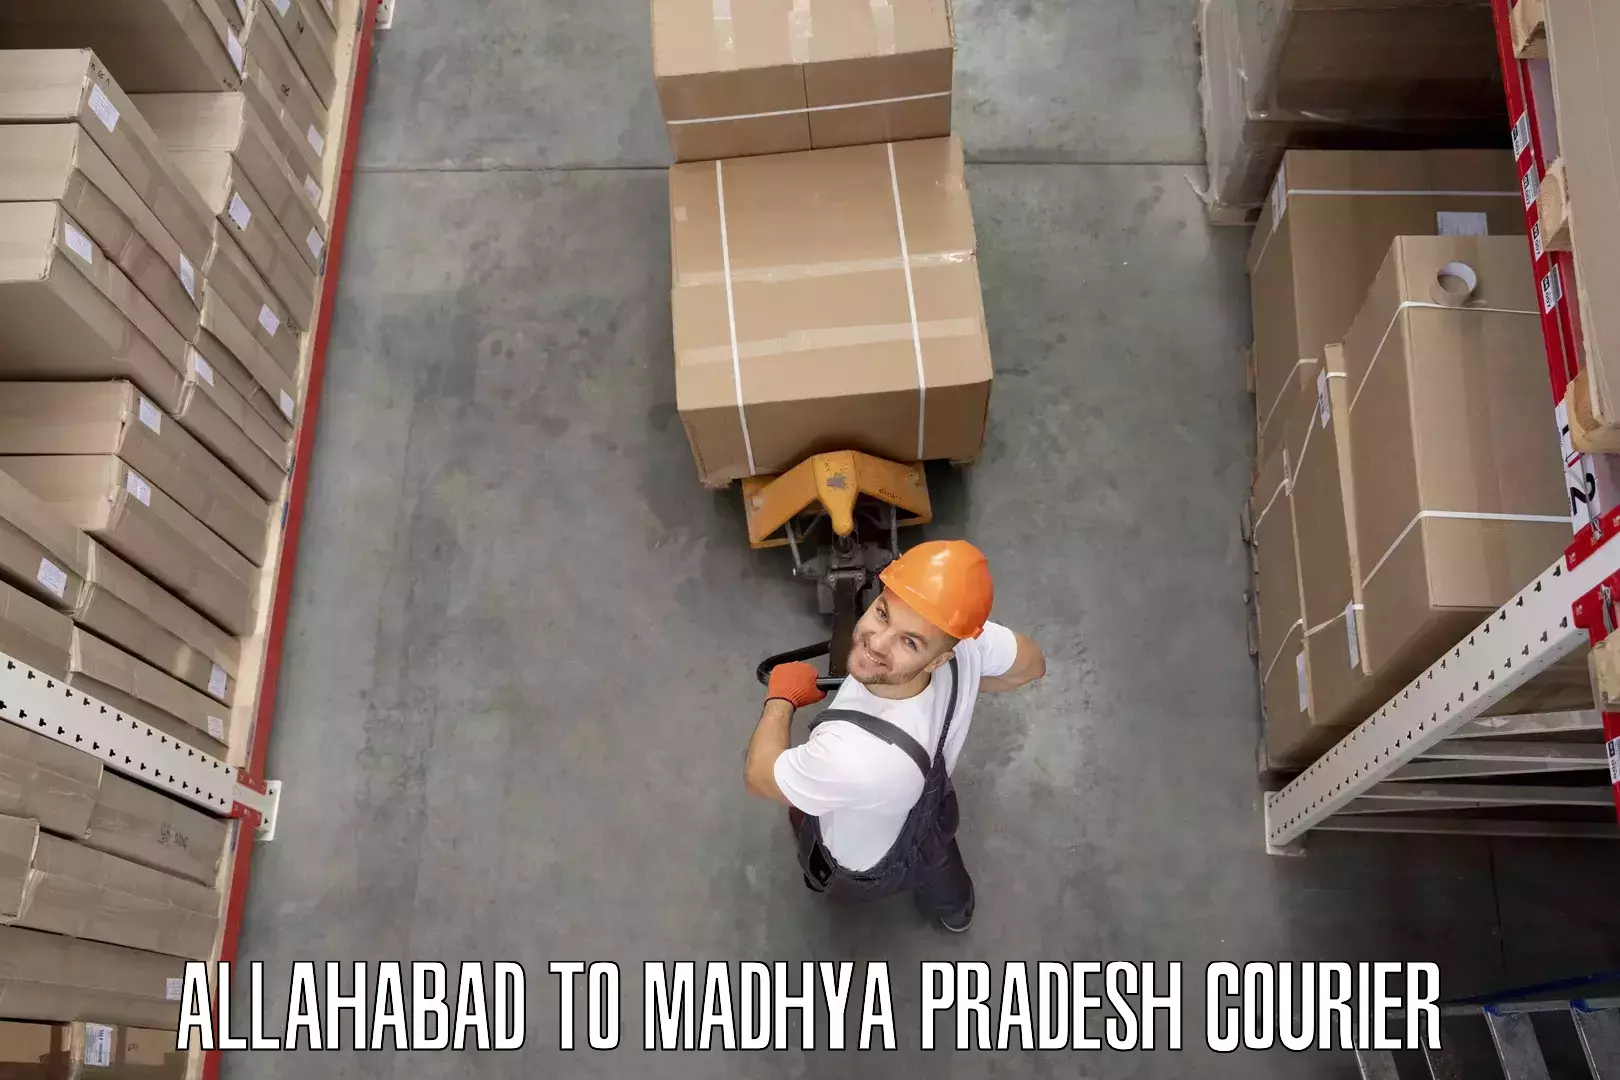 Furniture transport professionals Allahabad to Indore